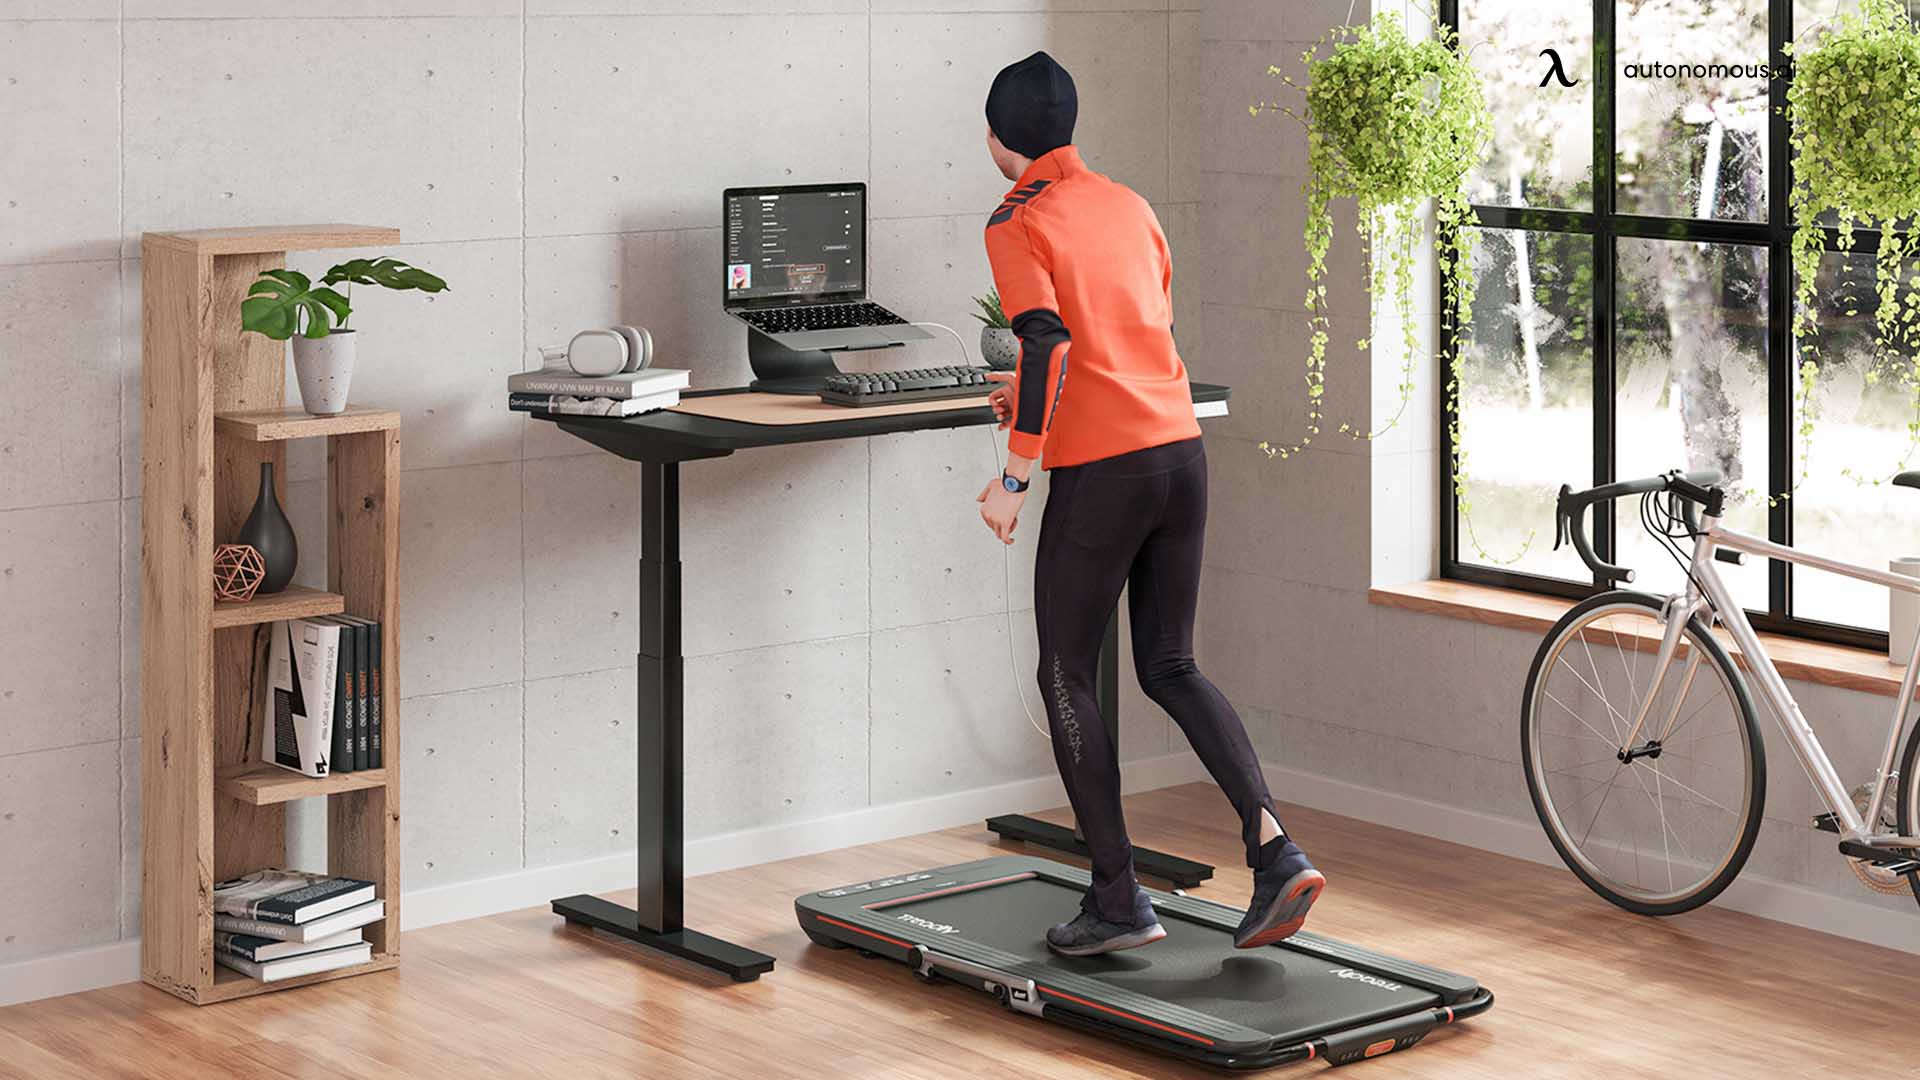 Gym-Integrated Workspace